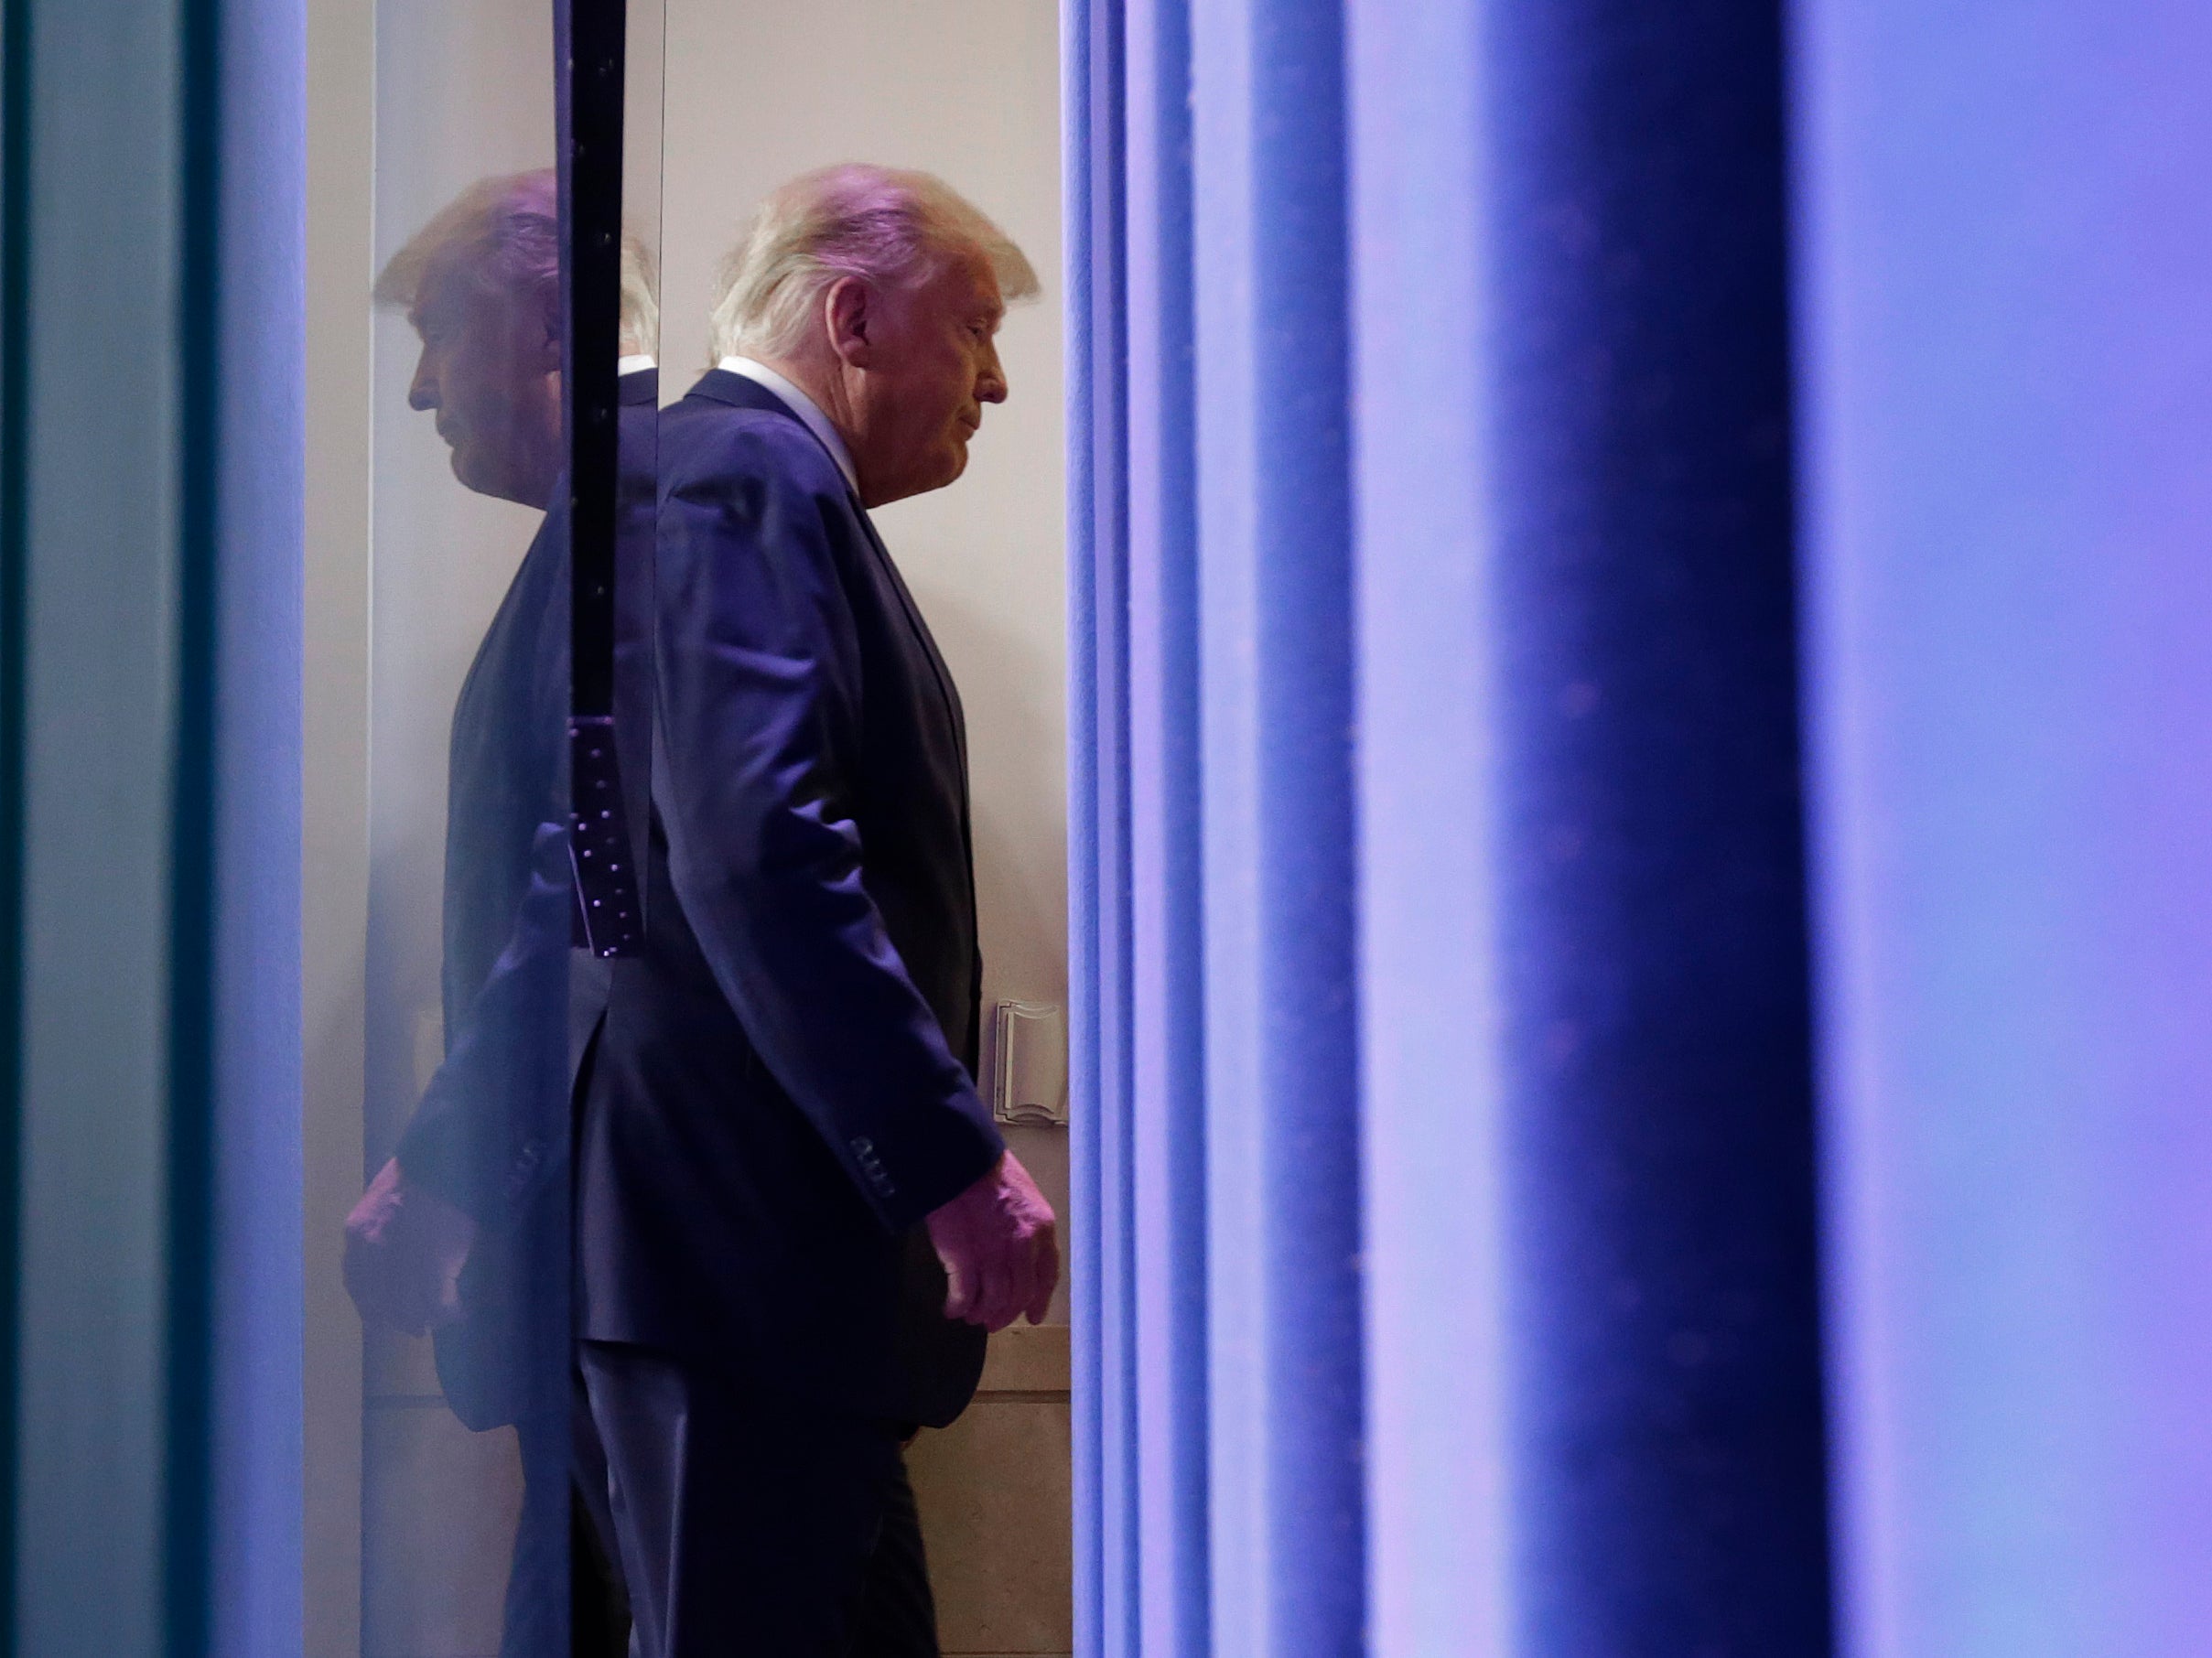 Donald Trump leaves after speaking in the briefing room at the White House on 5 November 2020 in Washington, DC